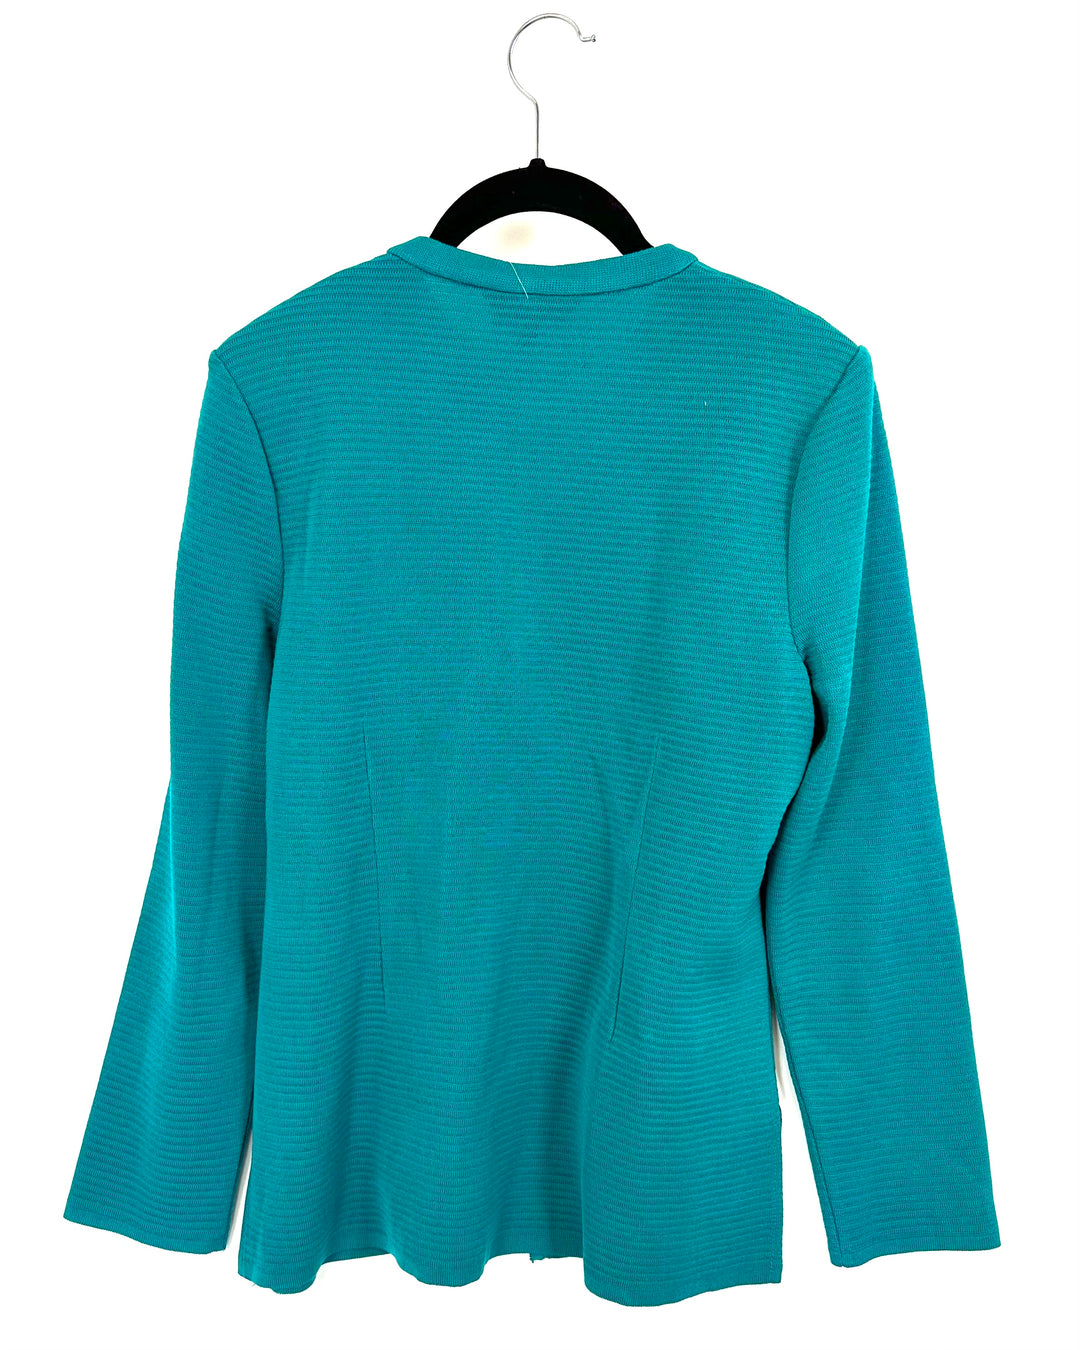 Bright Teal Cardigan - Size 2-4